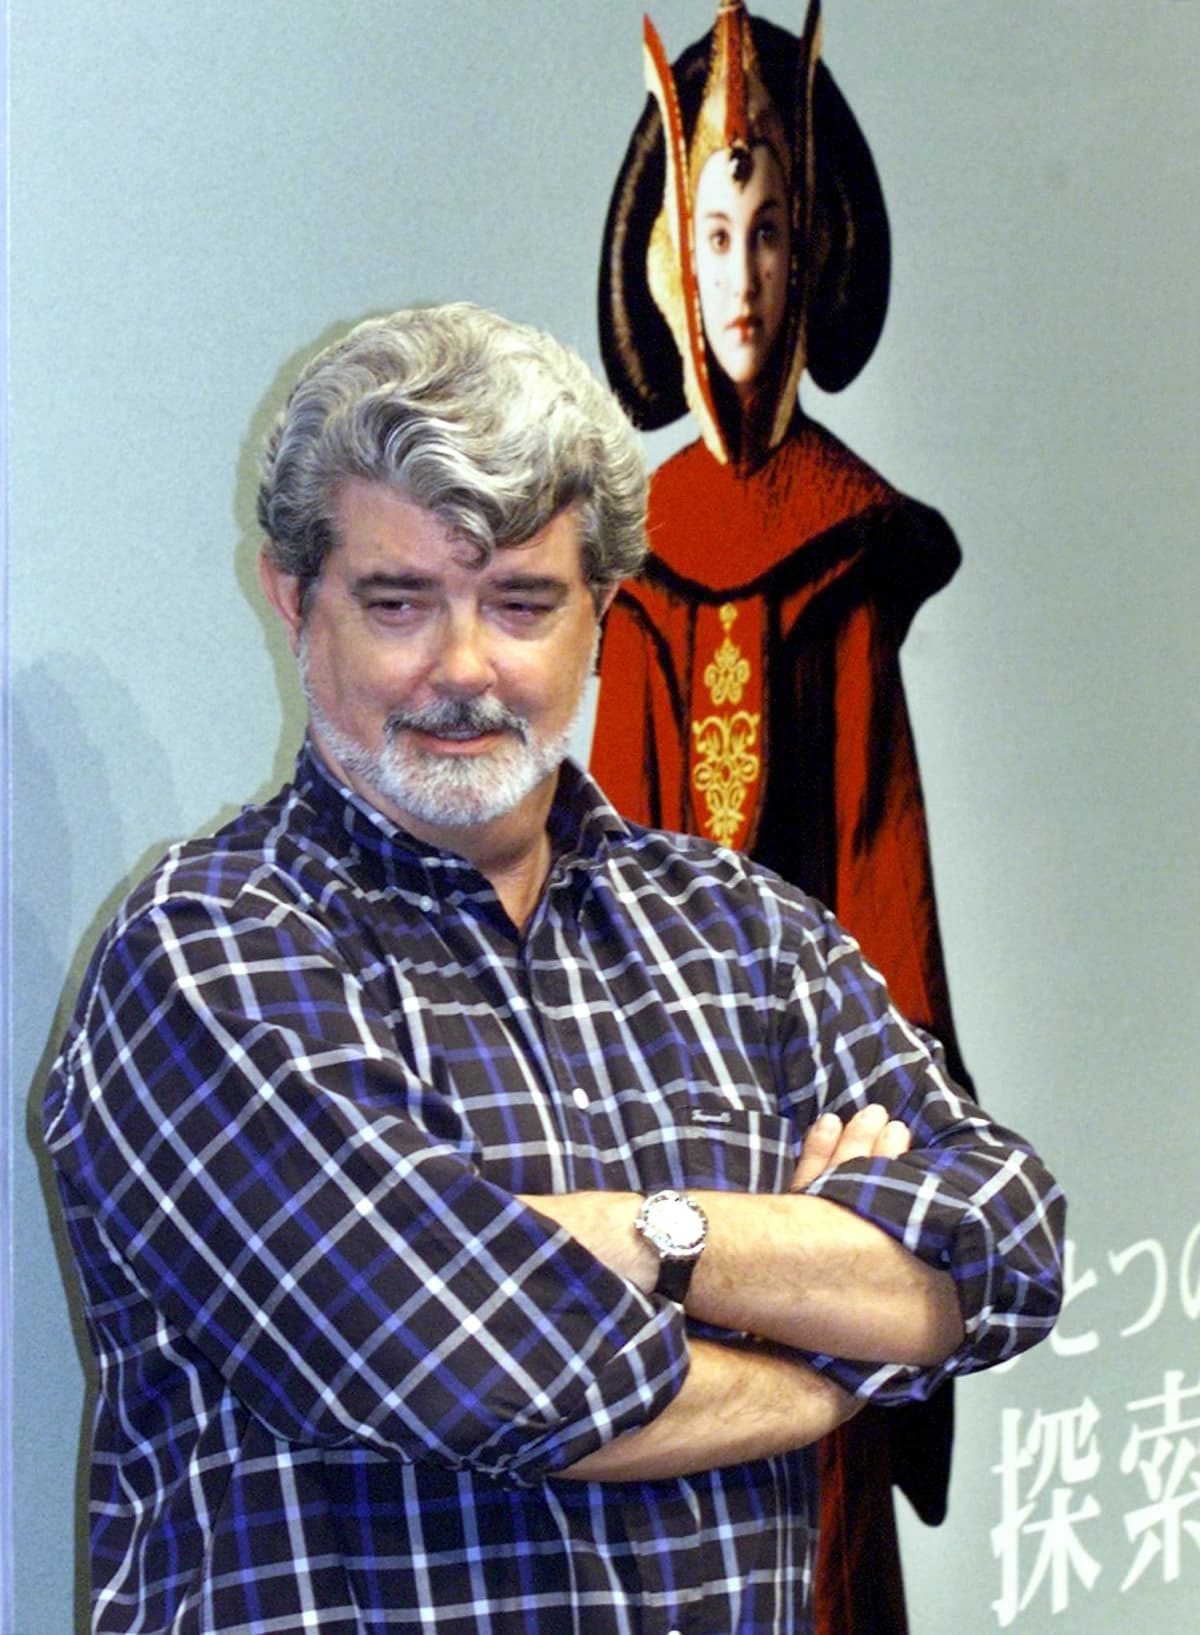 Director George Lucas posing during a news conference while promoting Star Wars: Episode 1 - The Phantom Menace.